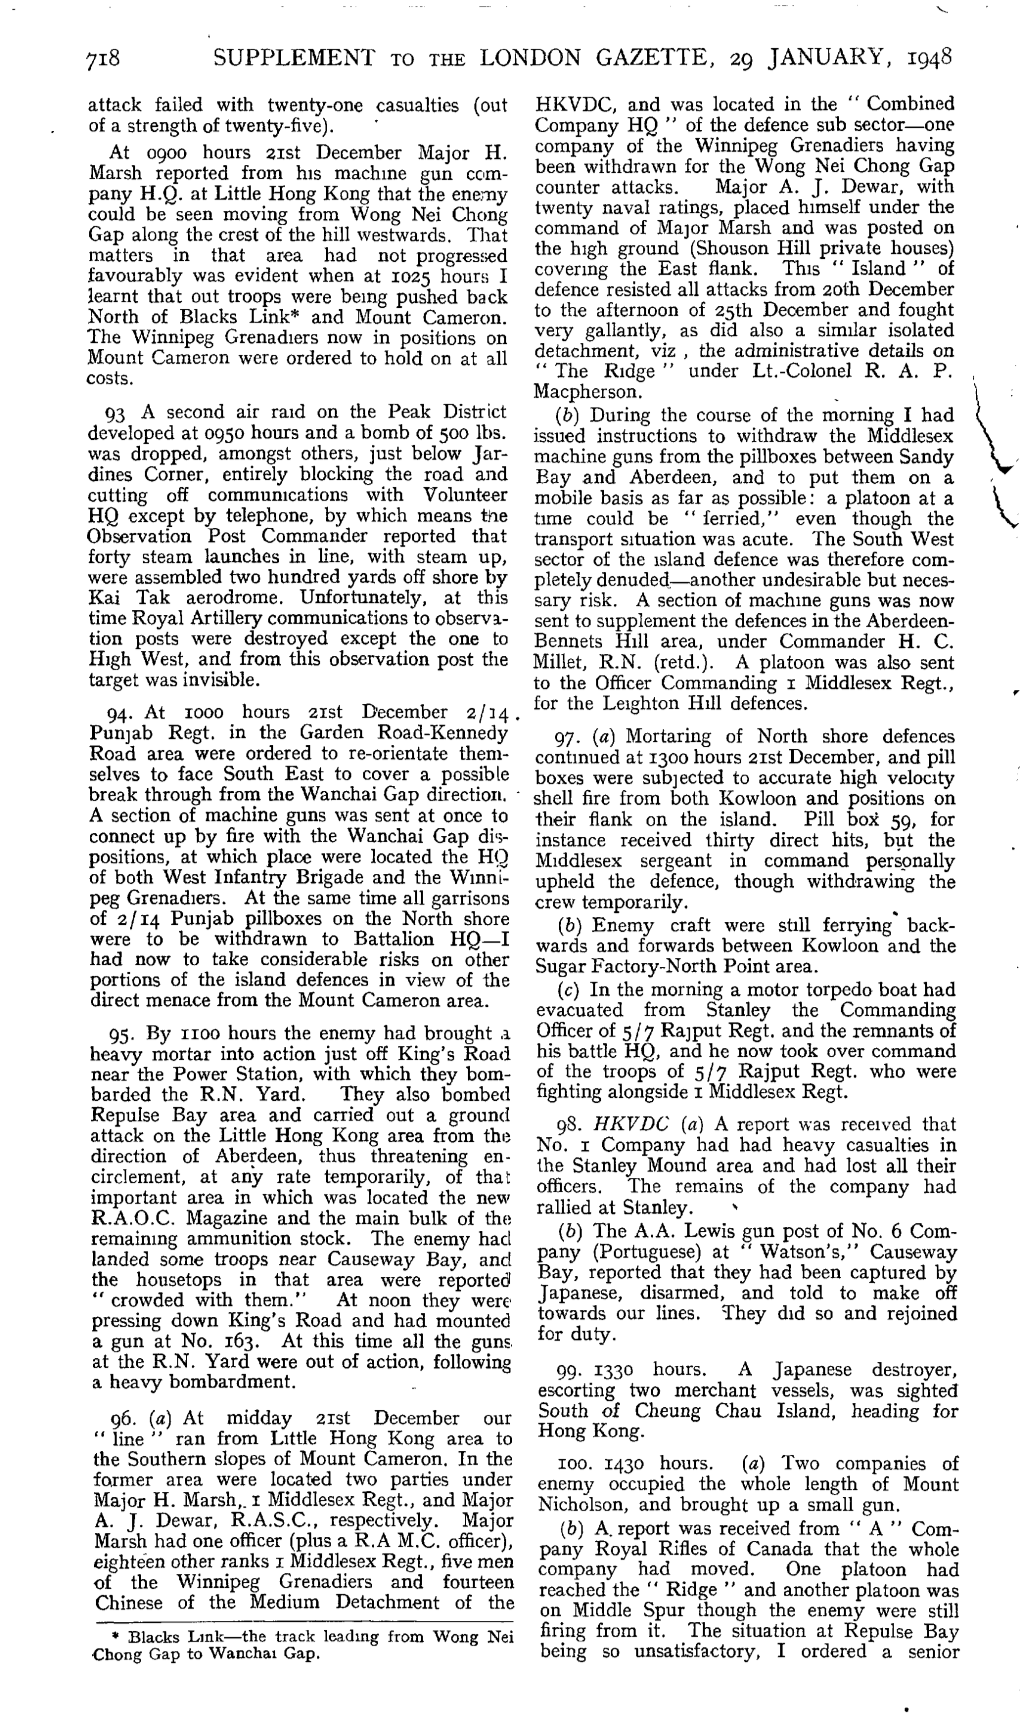 718 Supplement to the London Gazette, 29 January, 1948